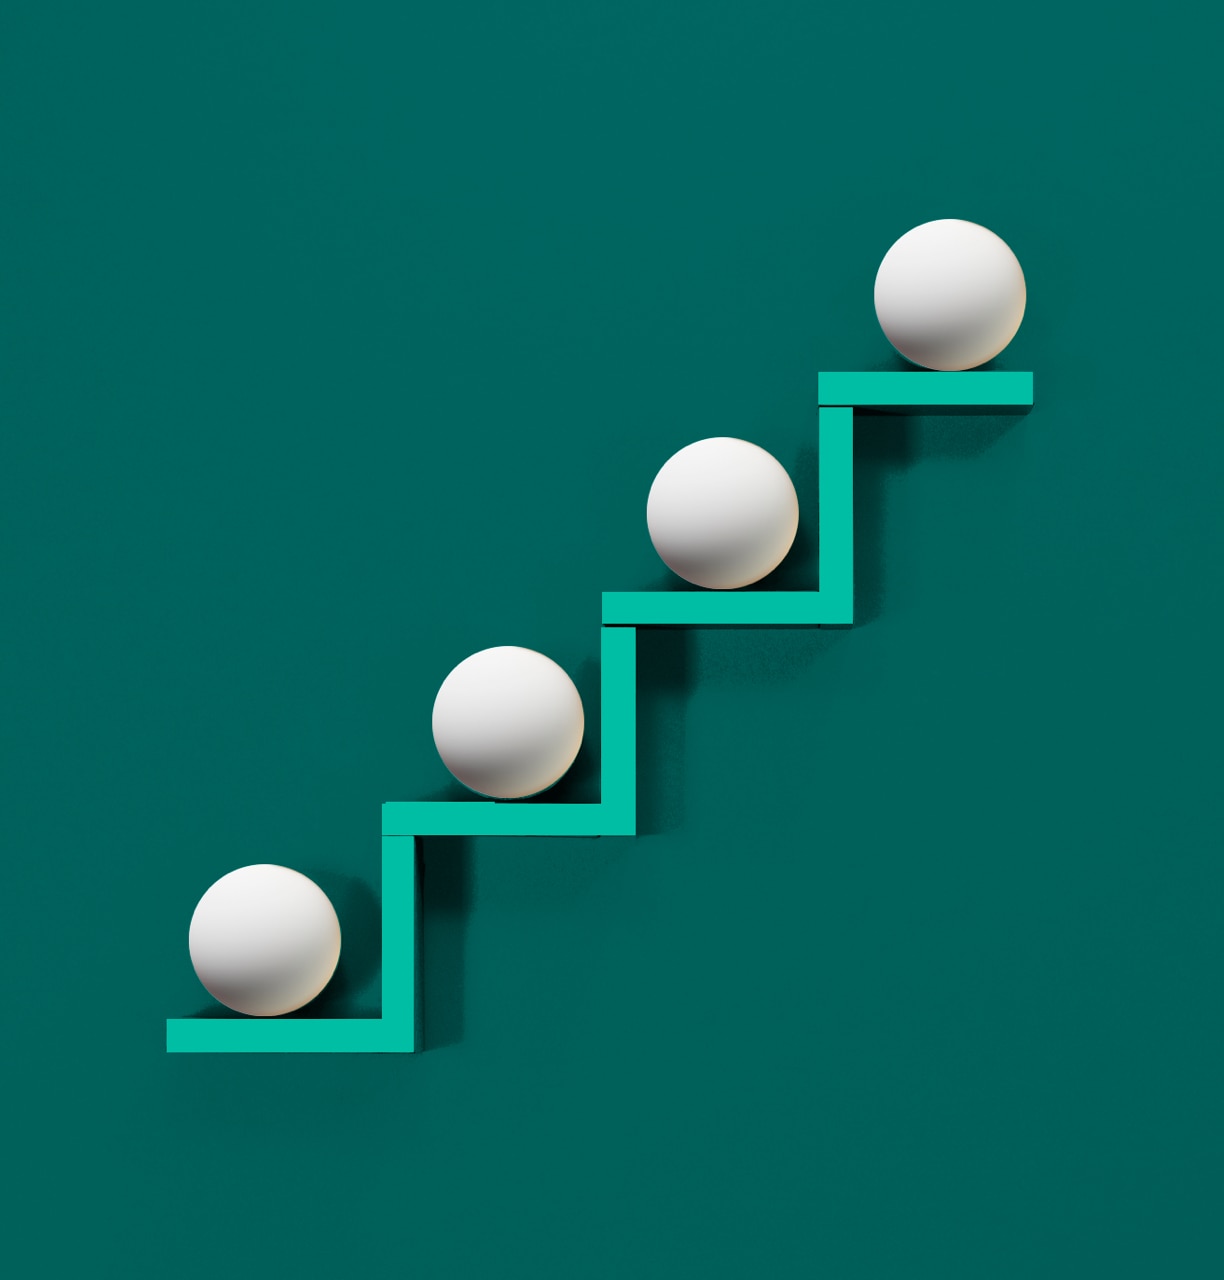 Illustration showing balls arranged on a set of ascending stairs. 